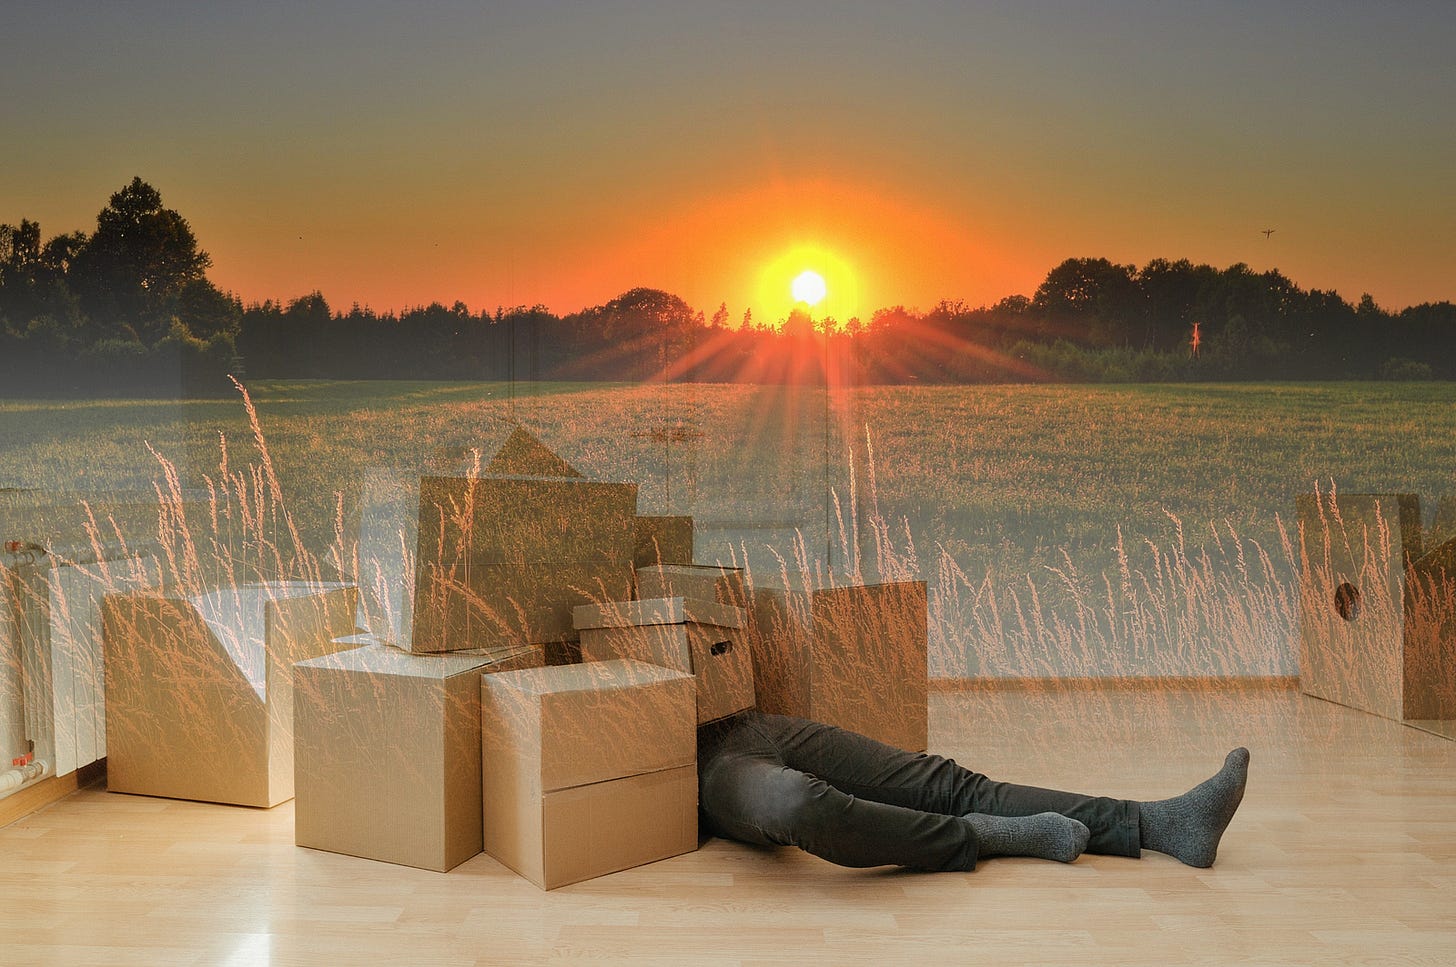 A golden sunset shines over a person lying on the ground, half buried in cardboard boxes.